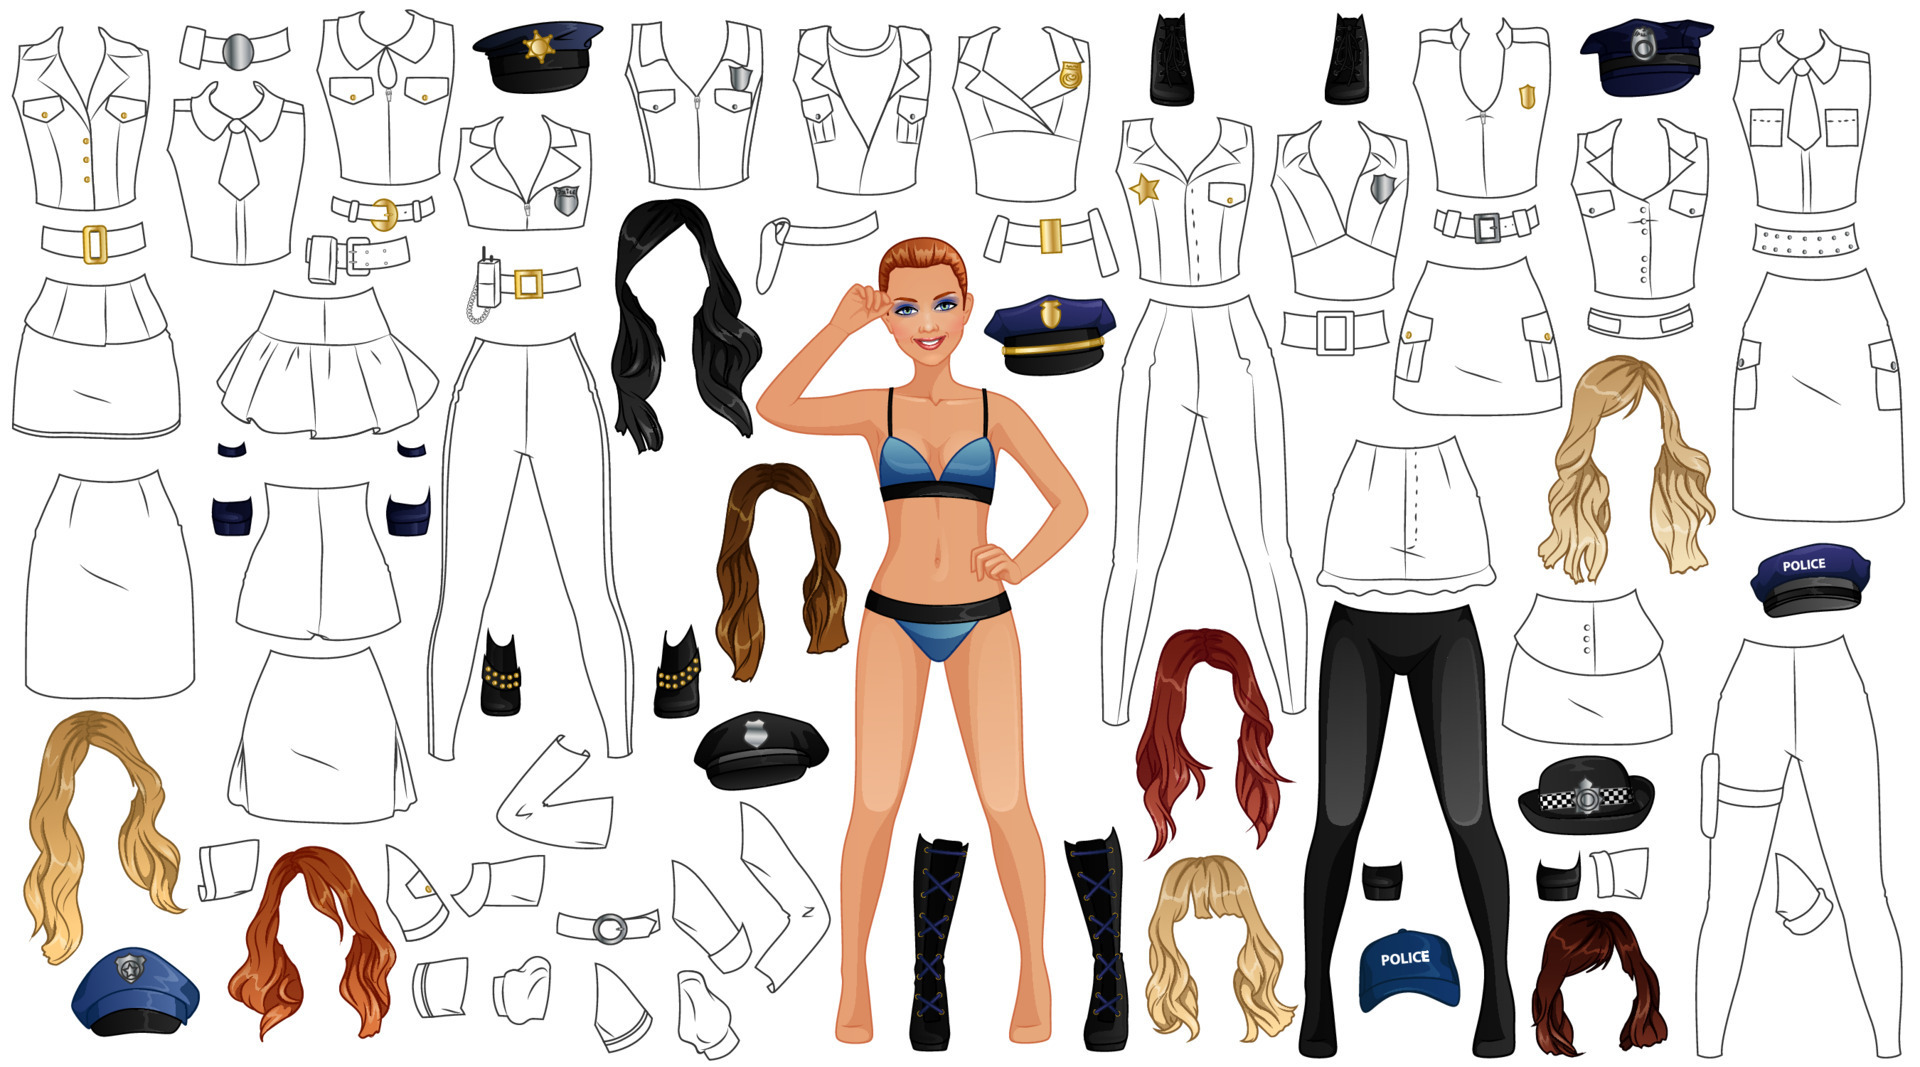 https://static.vecteezy.com/system/resources/previews/022/311/706/original/police-uniform-coloring-page-paper-doll-with-female-figure-clothes-hairstyles-and-accessories-illustration-vector.jpg